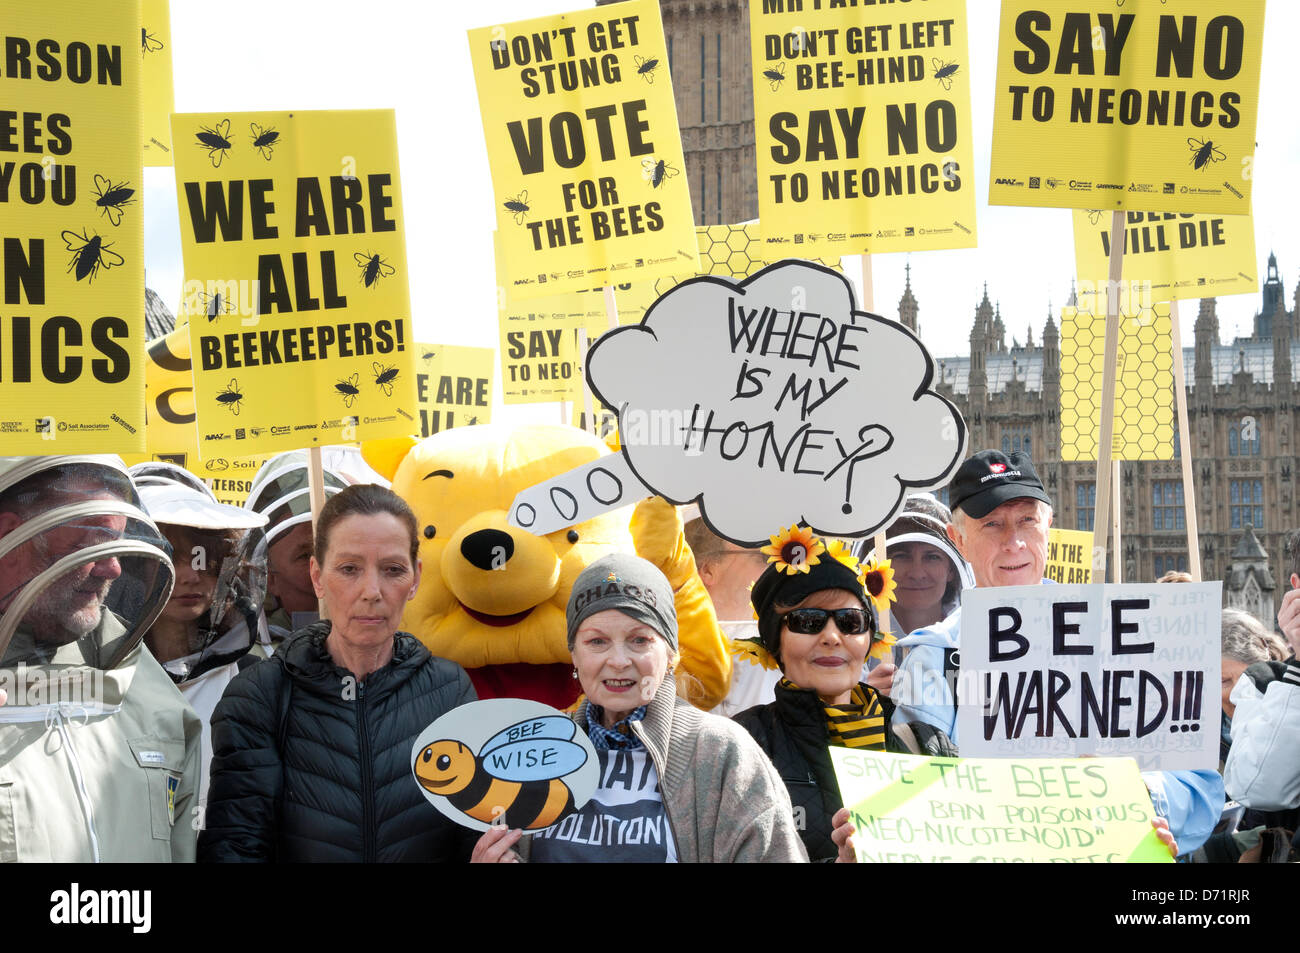 London, England UK 26/04/2013. Designers Katharine Hamnett CBE (second left) and Dame Vivienne Westwood (third left) join beekeepers and fancy dressed supporters take to Parliament Square to call for a European ban on neonicotinoid pesticides. Organisers hope to persuade Rt Hon Owen Paterson MP, Secretary of State for Environment and Rural Affairs, to support a EU vote banning the bee harming neonicotinoid pesticides on Monday 29th April. Stock Photo